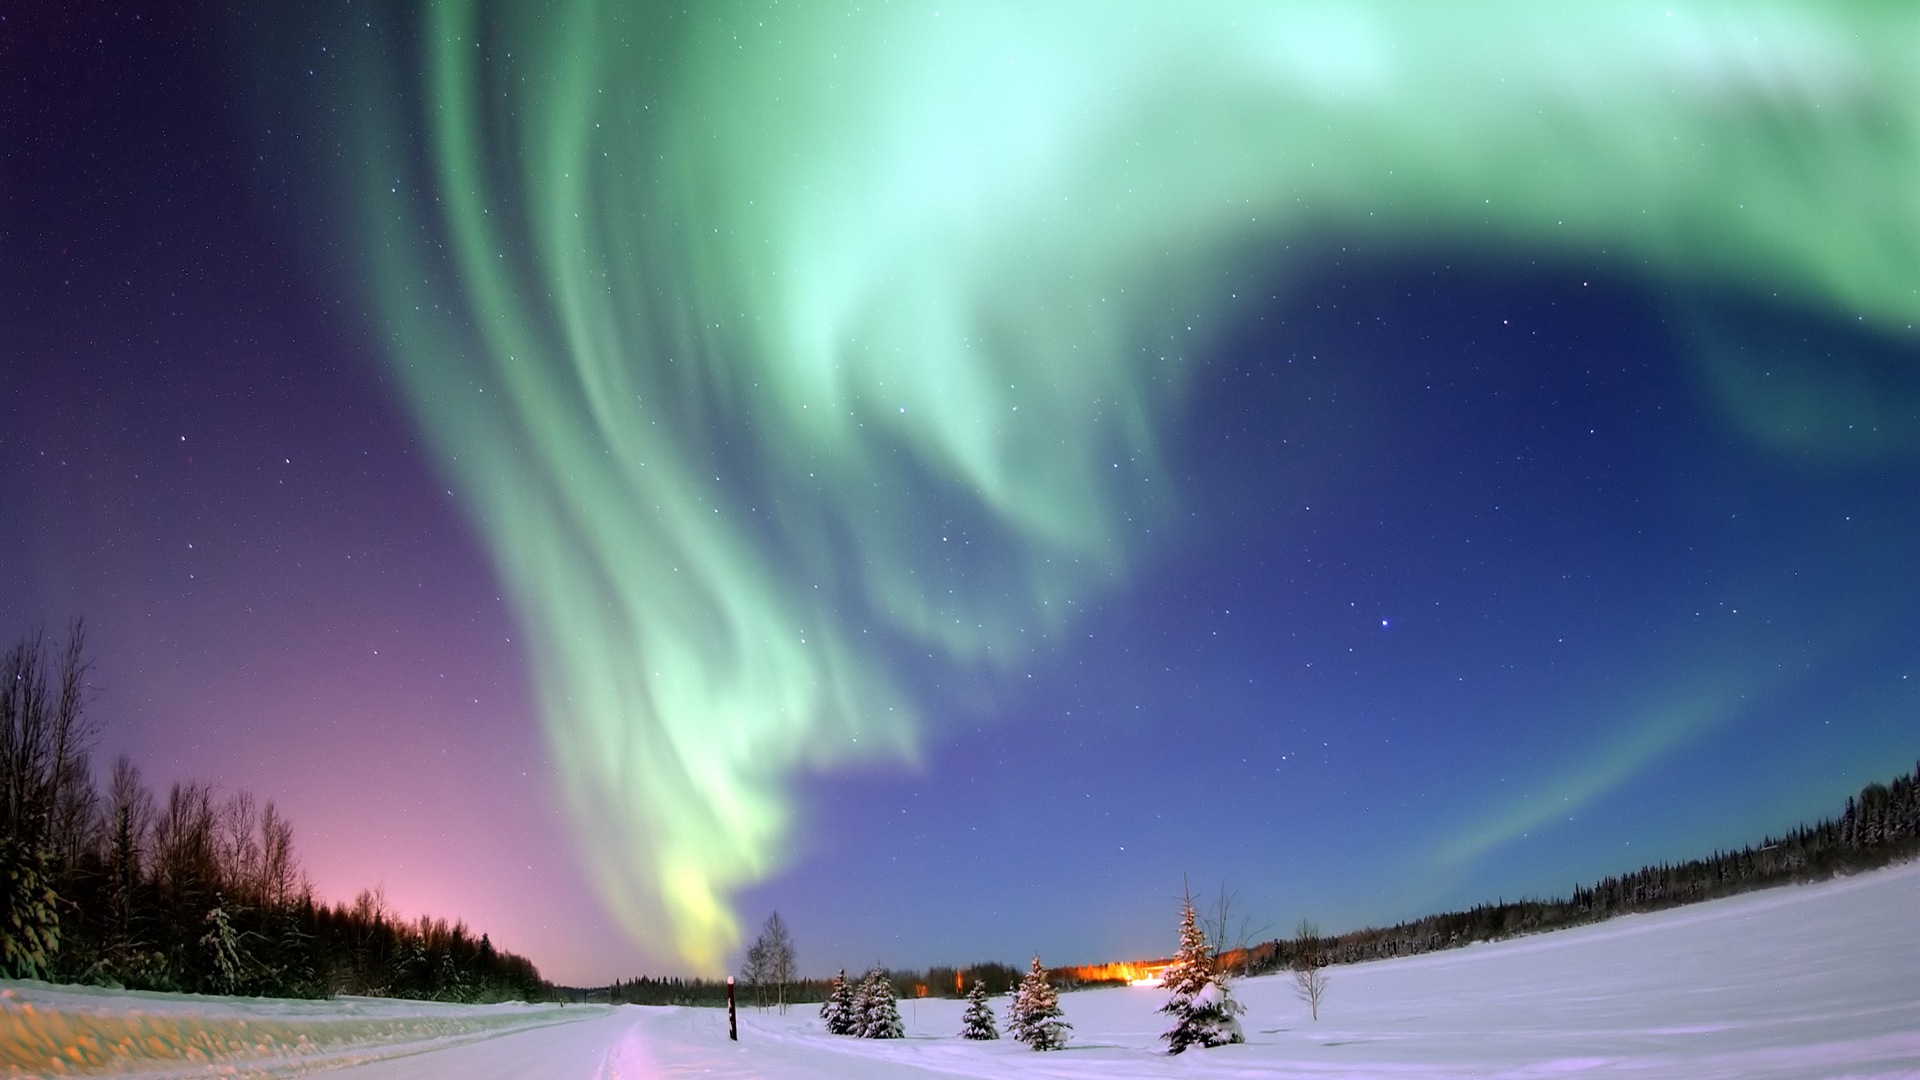 Natural wonders of the Northern Lights HD Wallpaper (2) #22 - 1920x1080